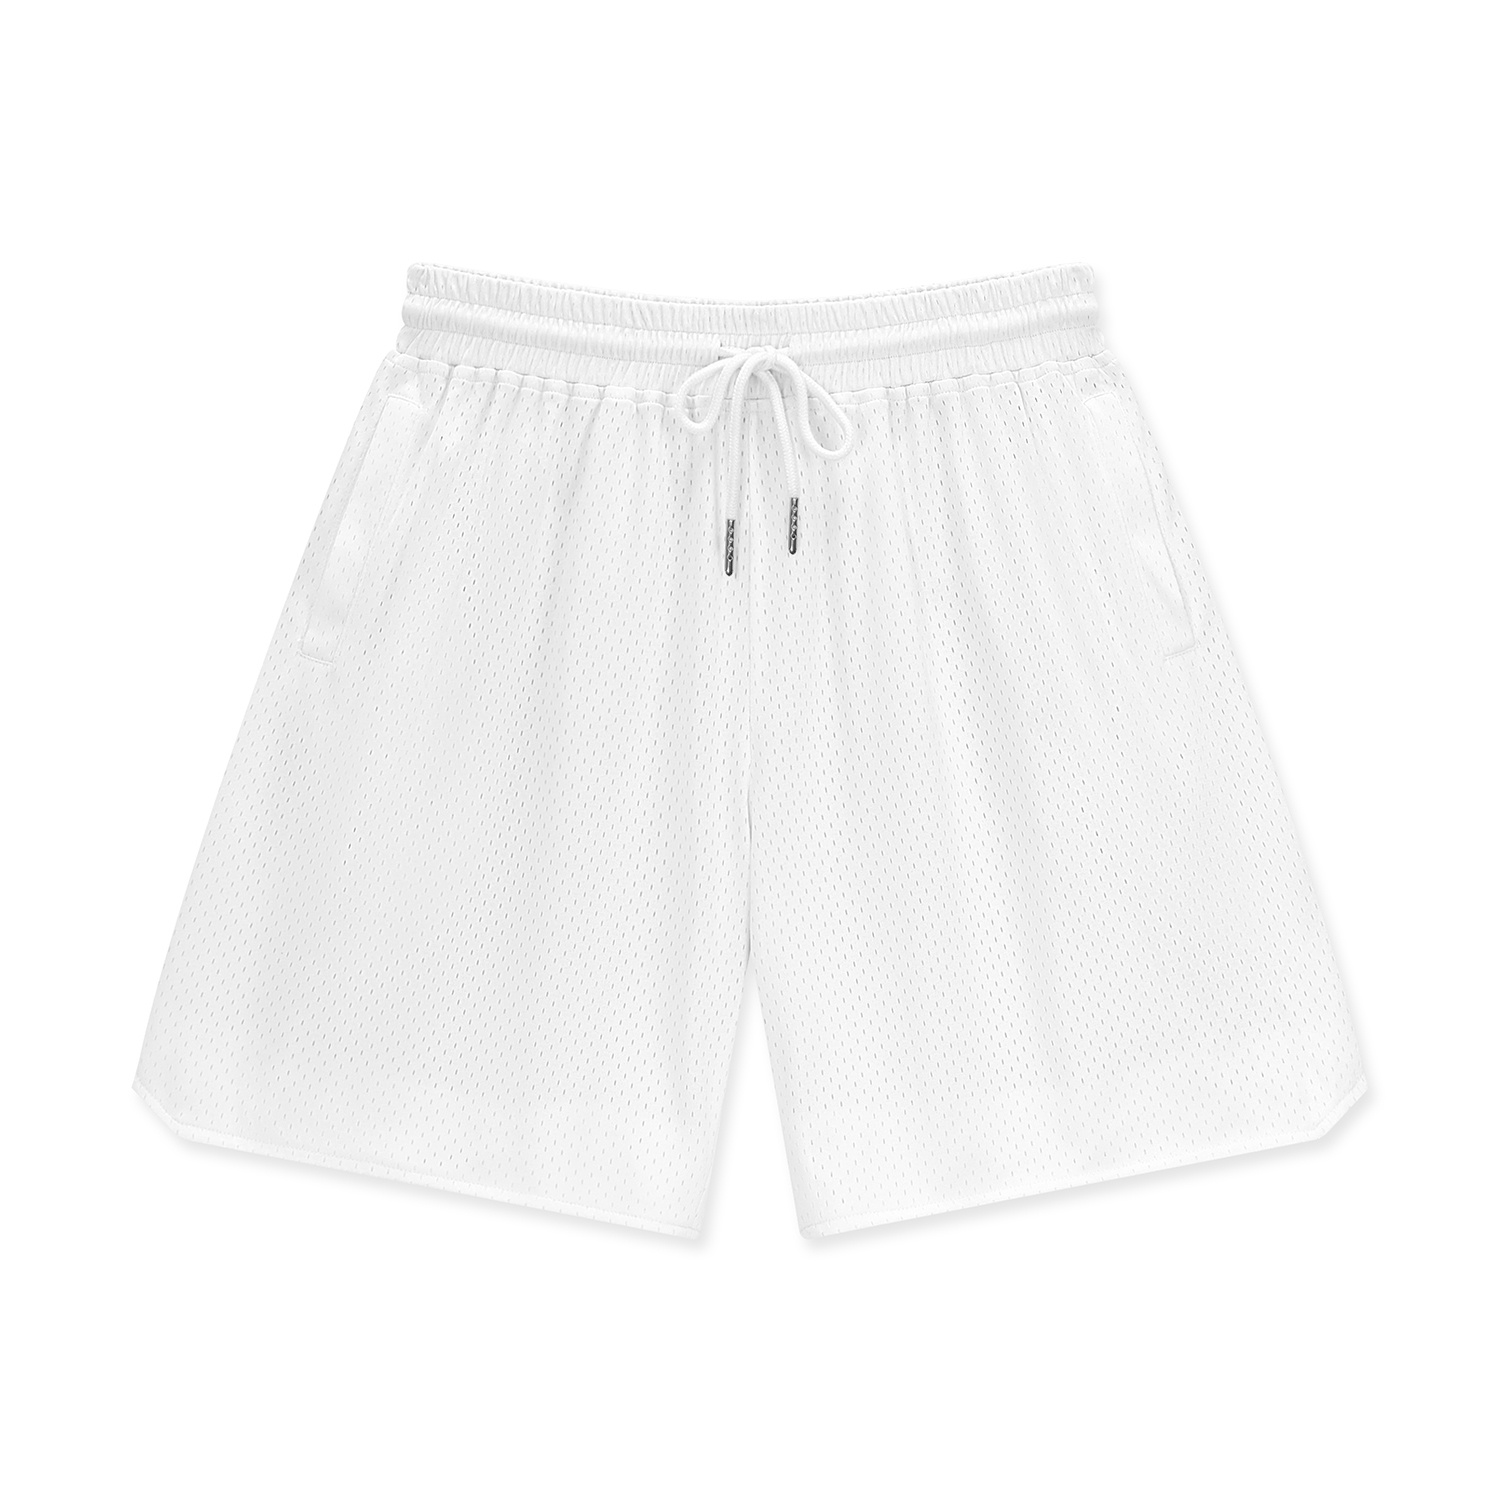 All-Over Print Men's Basketball Shorts Fast Drying | HugePOD